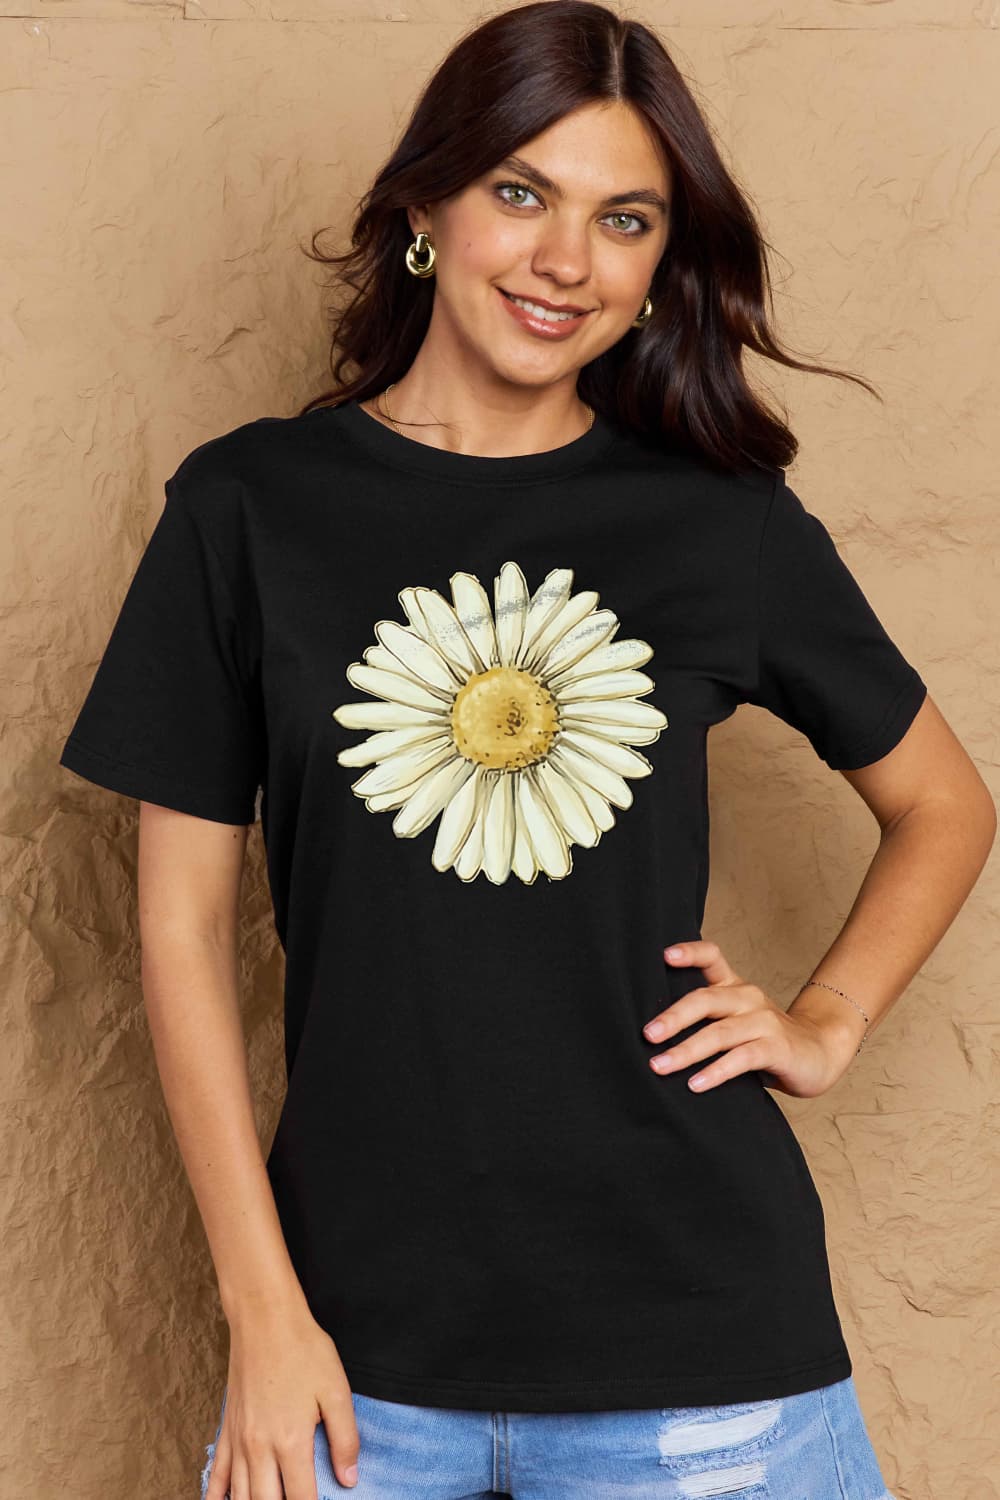 Malibu Dreams Simply Love Full Size FLOWER Graphic Cotton Tee